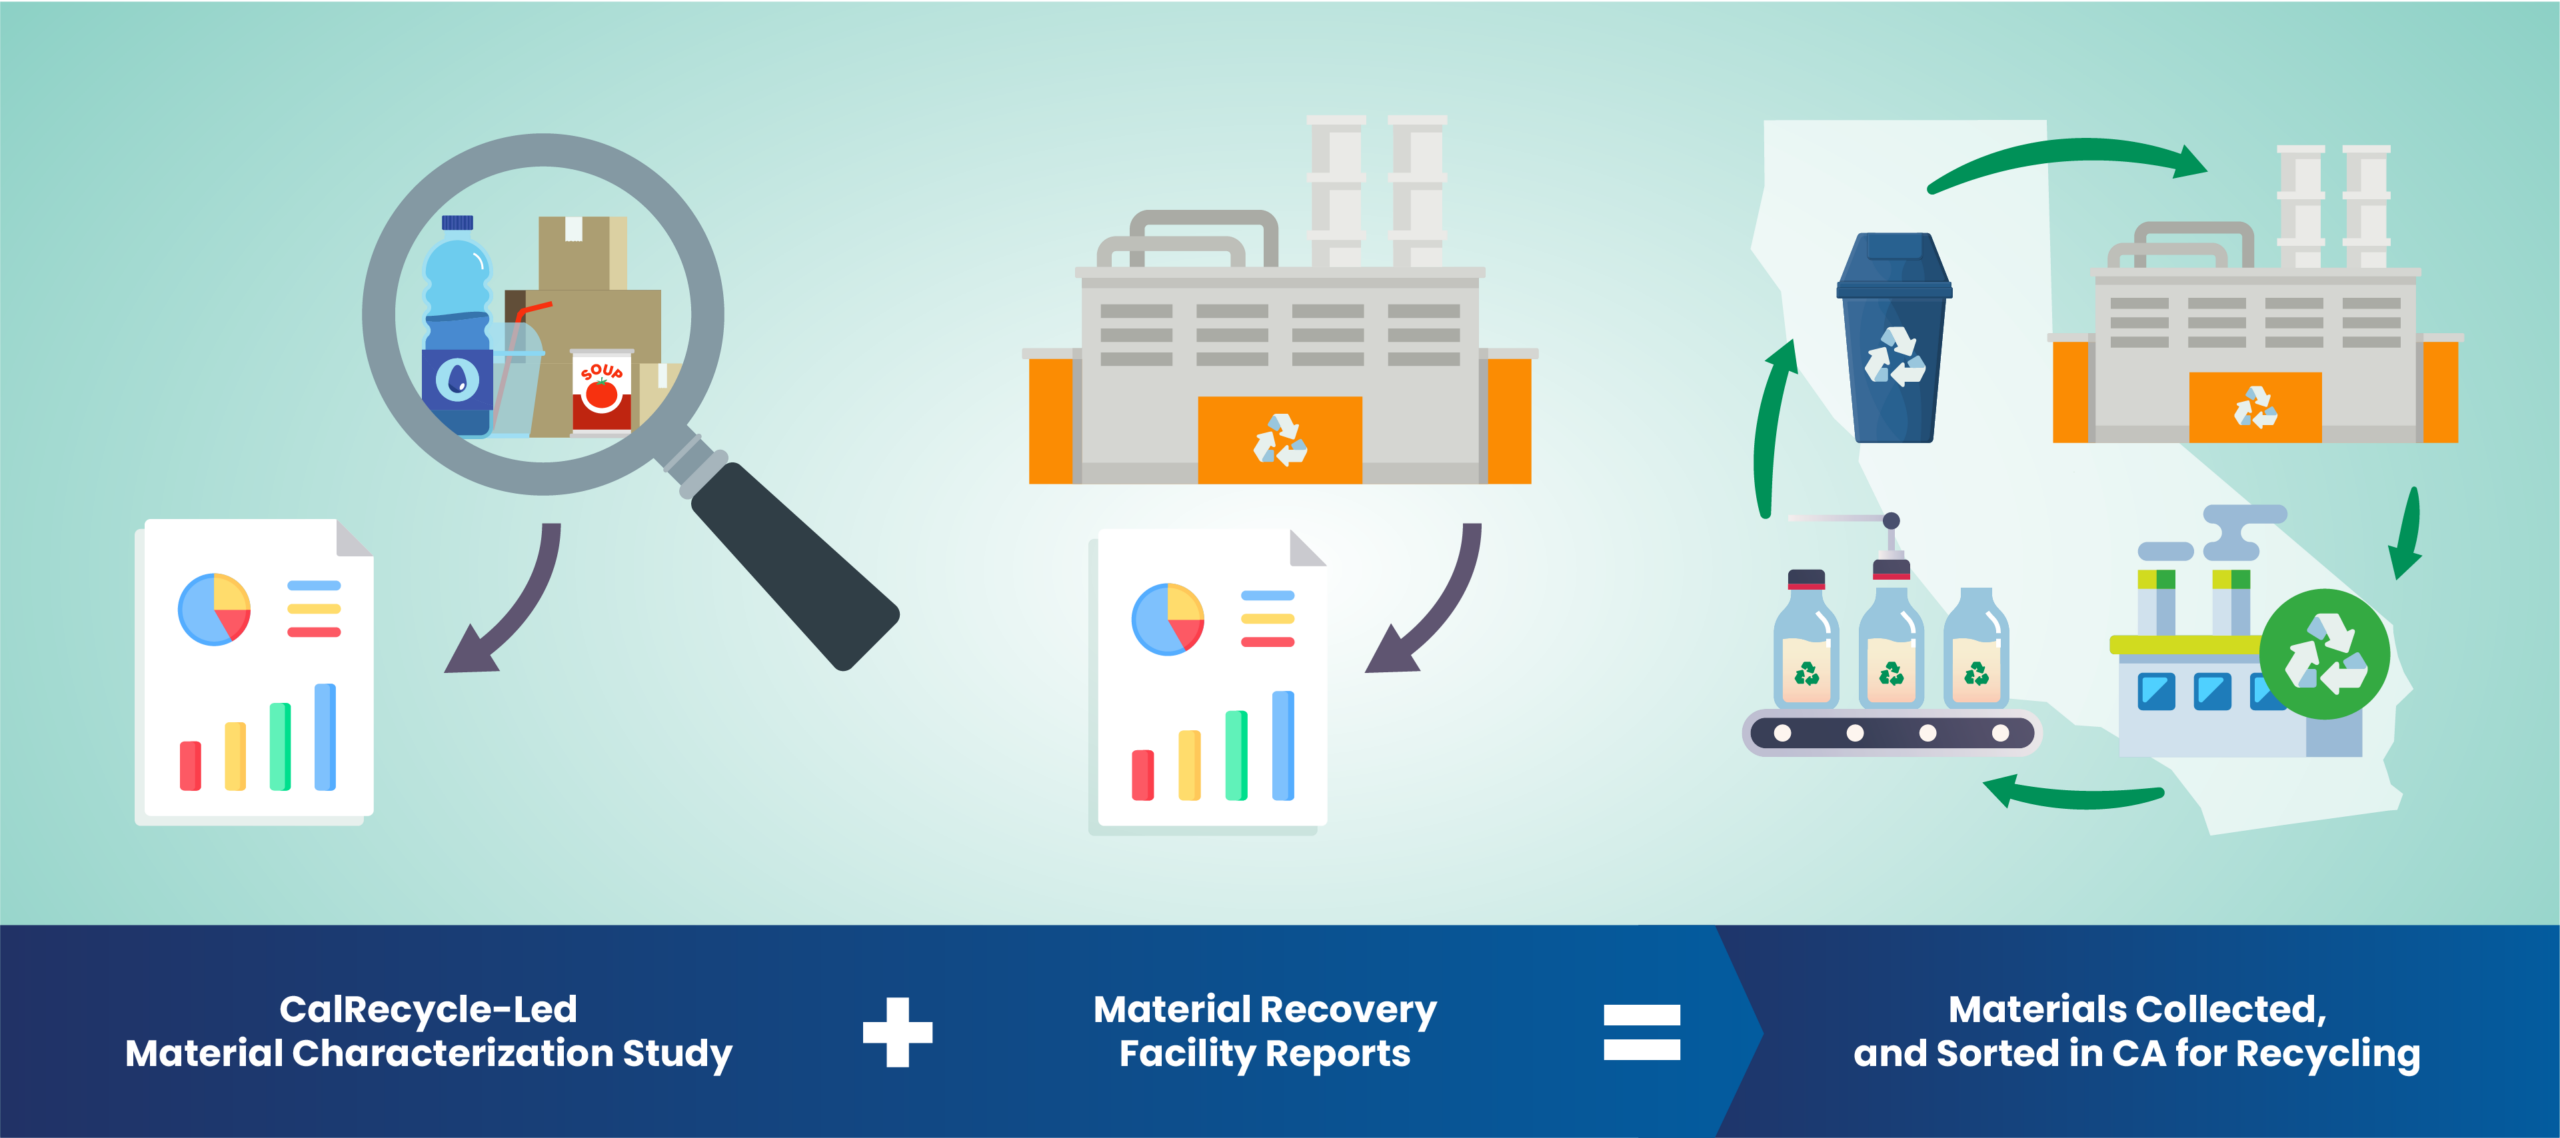 CalRecycle-Led Material Characterization Study + Material Recovery Facility Reports = Materials Collected, and Sorted in CA for Recycling